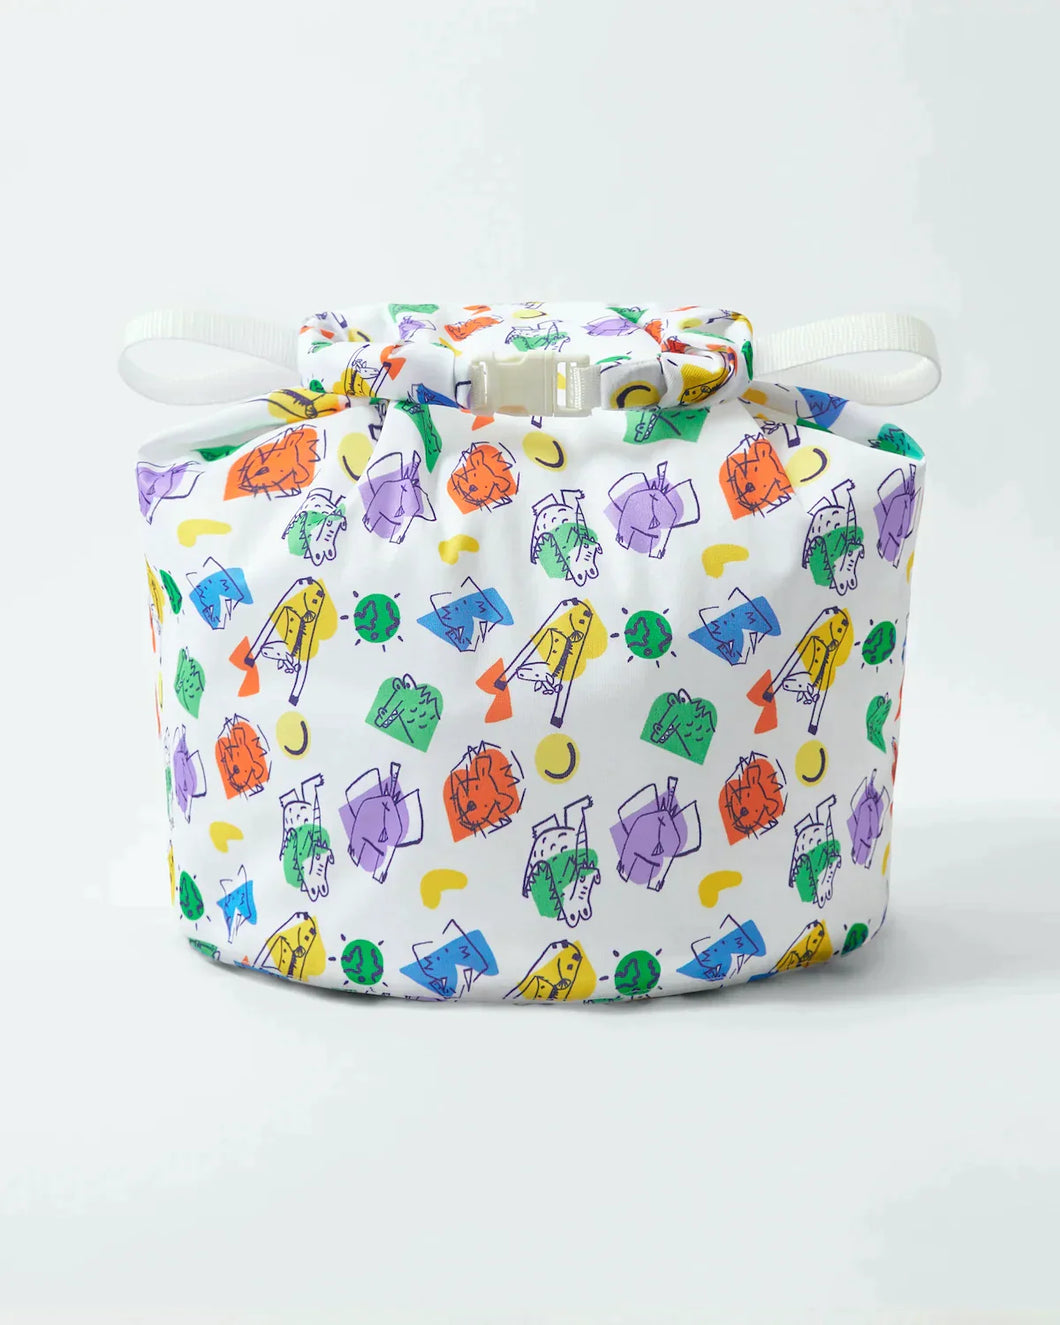 Bambino Mio - Stay at Home wet bag